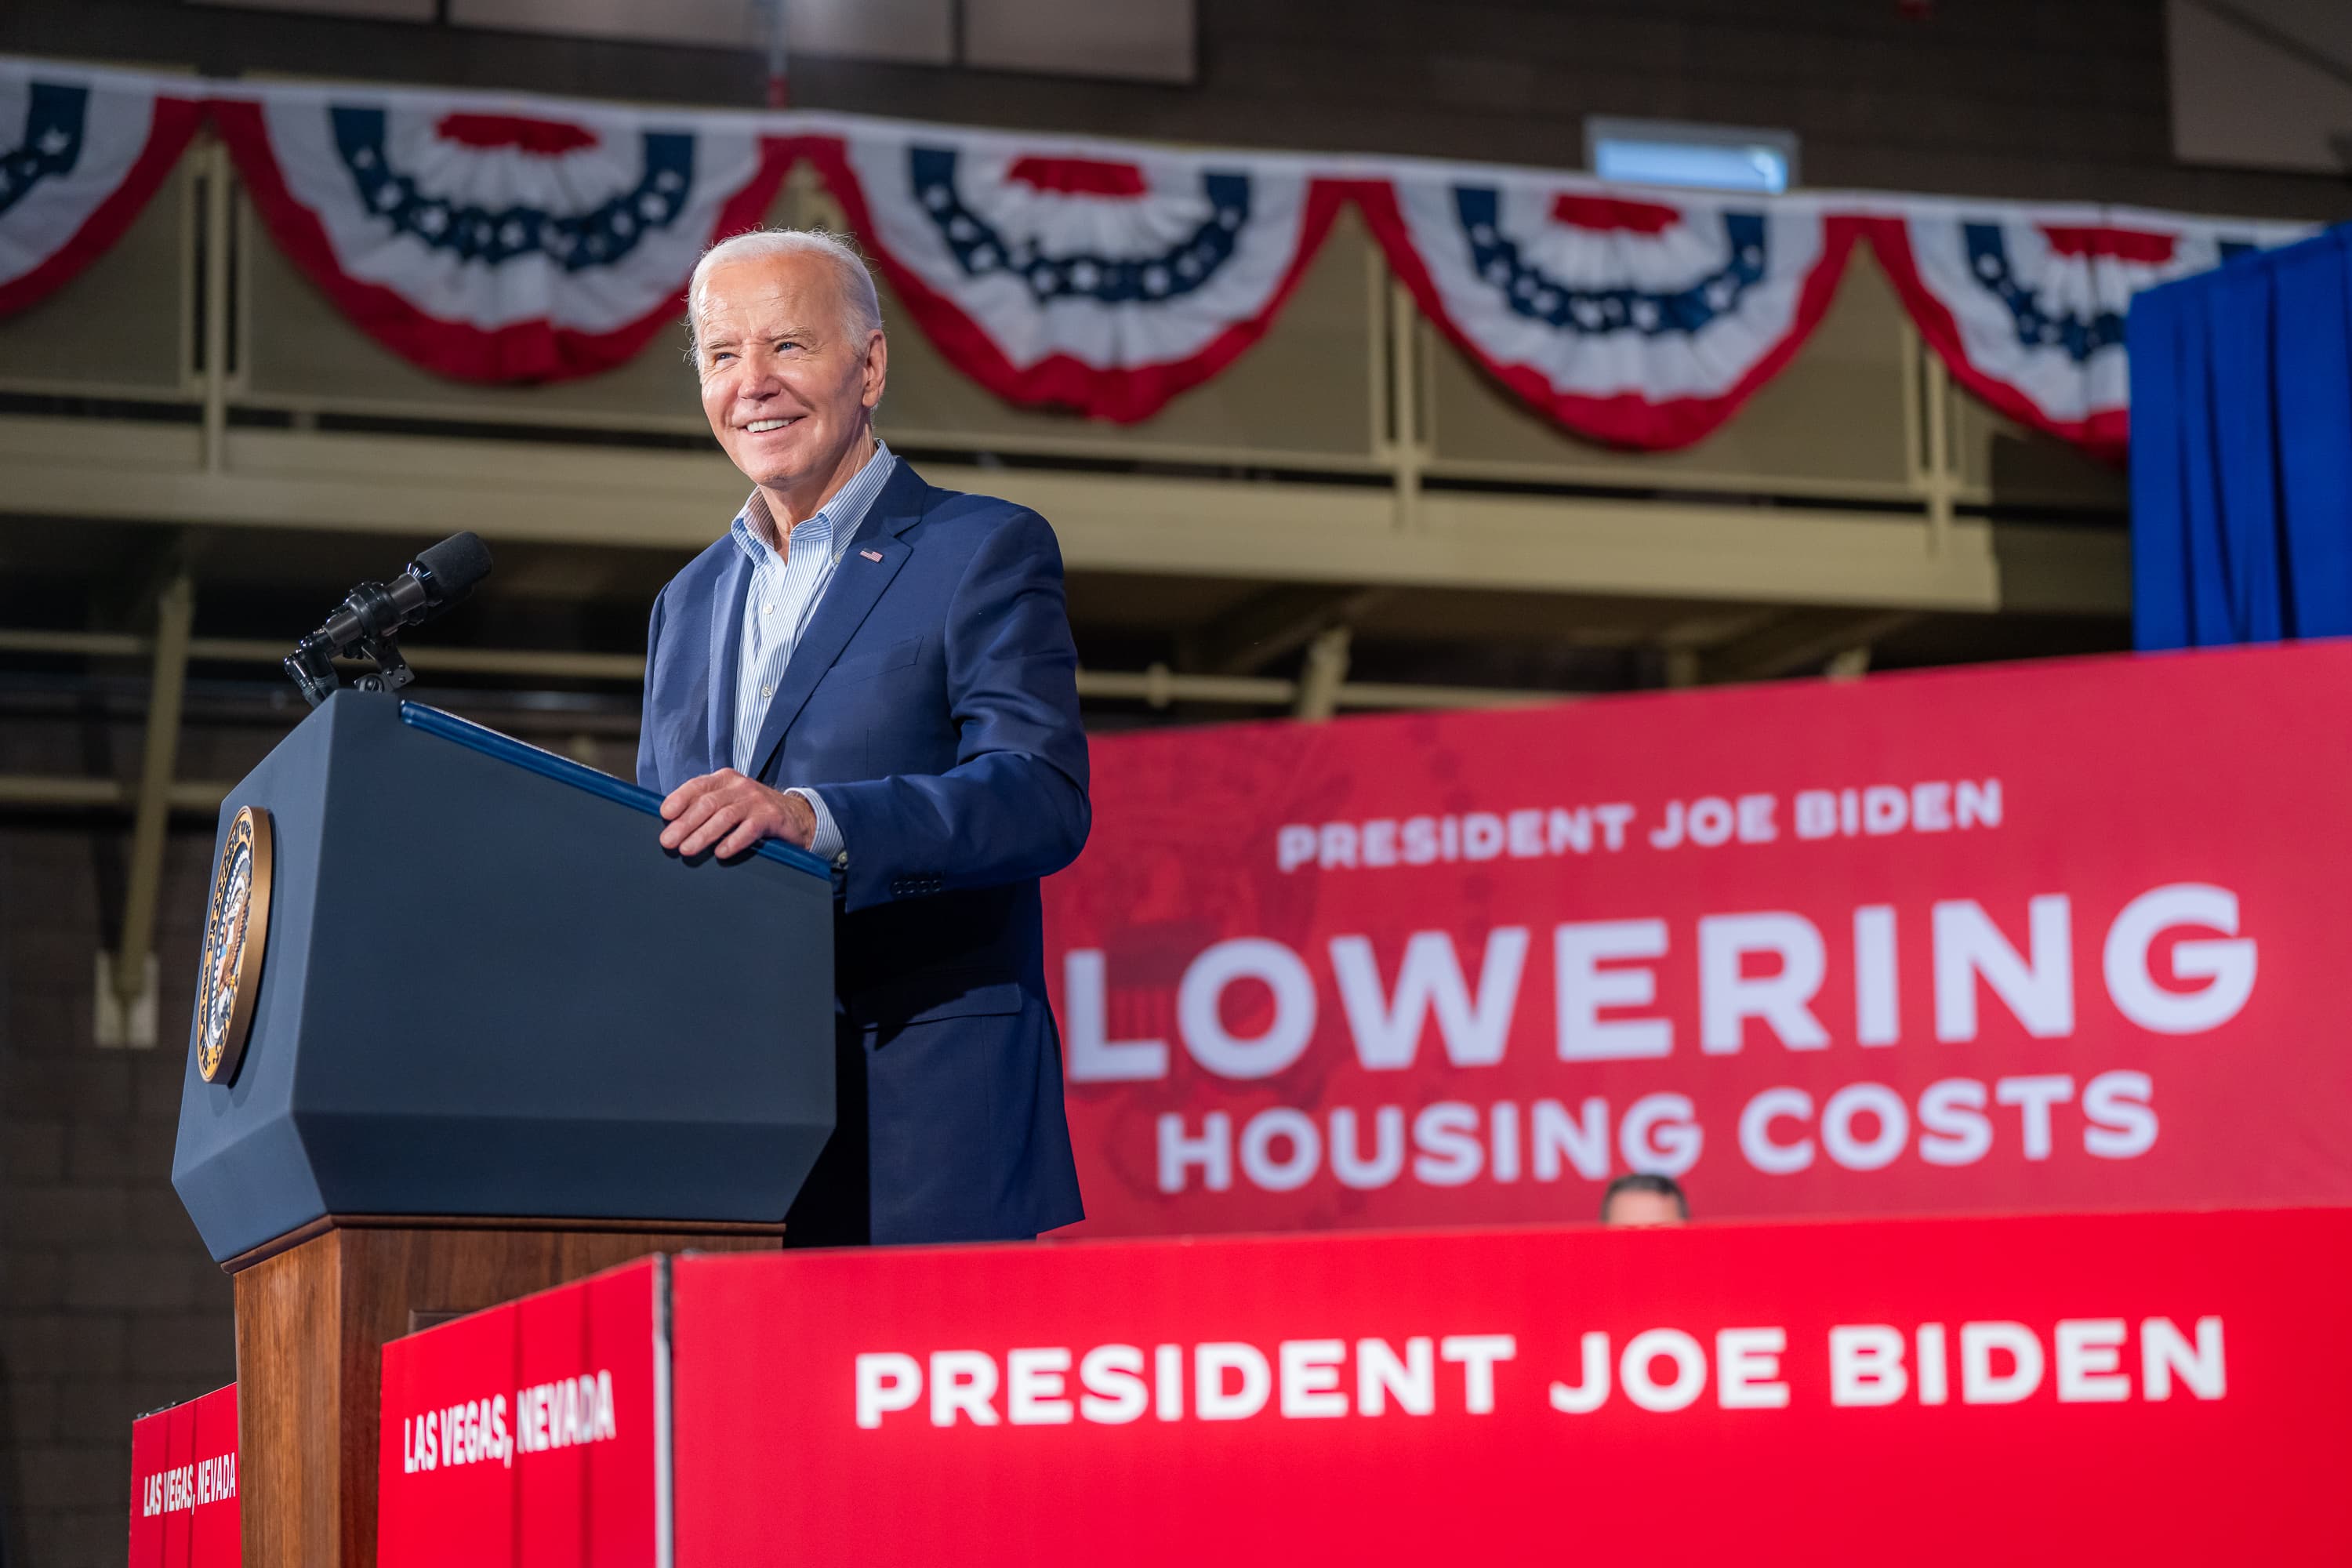 He Should Stay: The Case for Keeping Biden